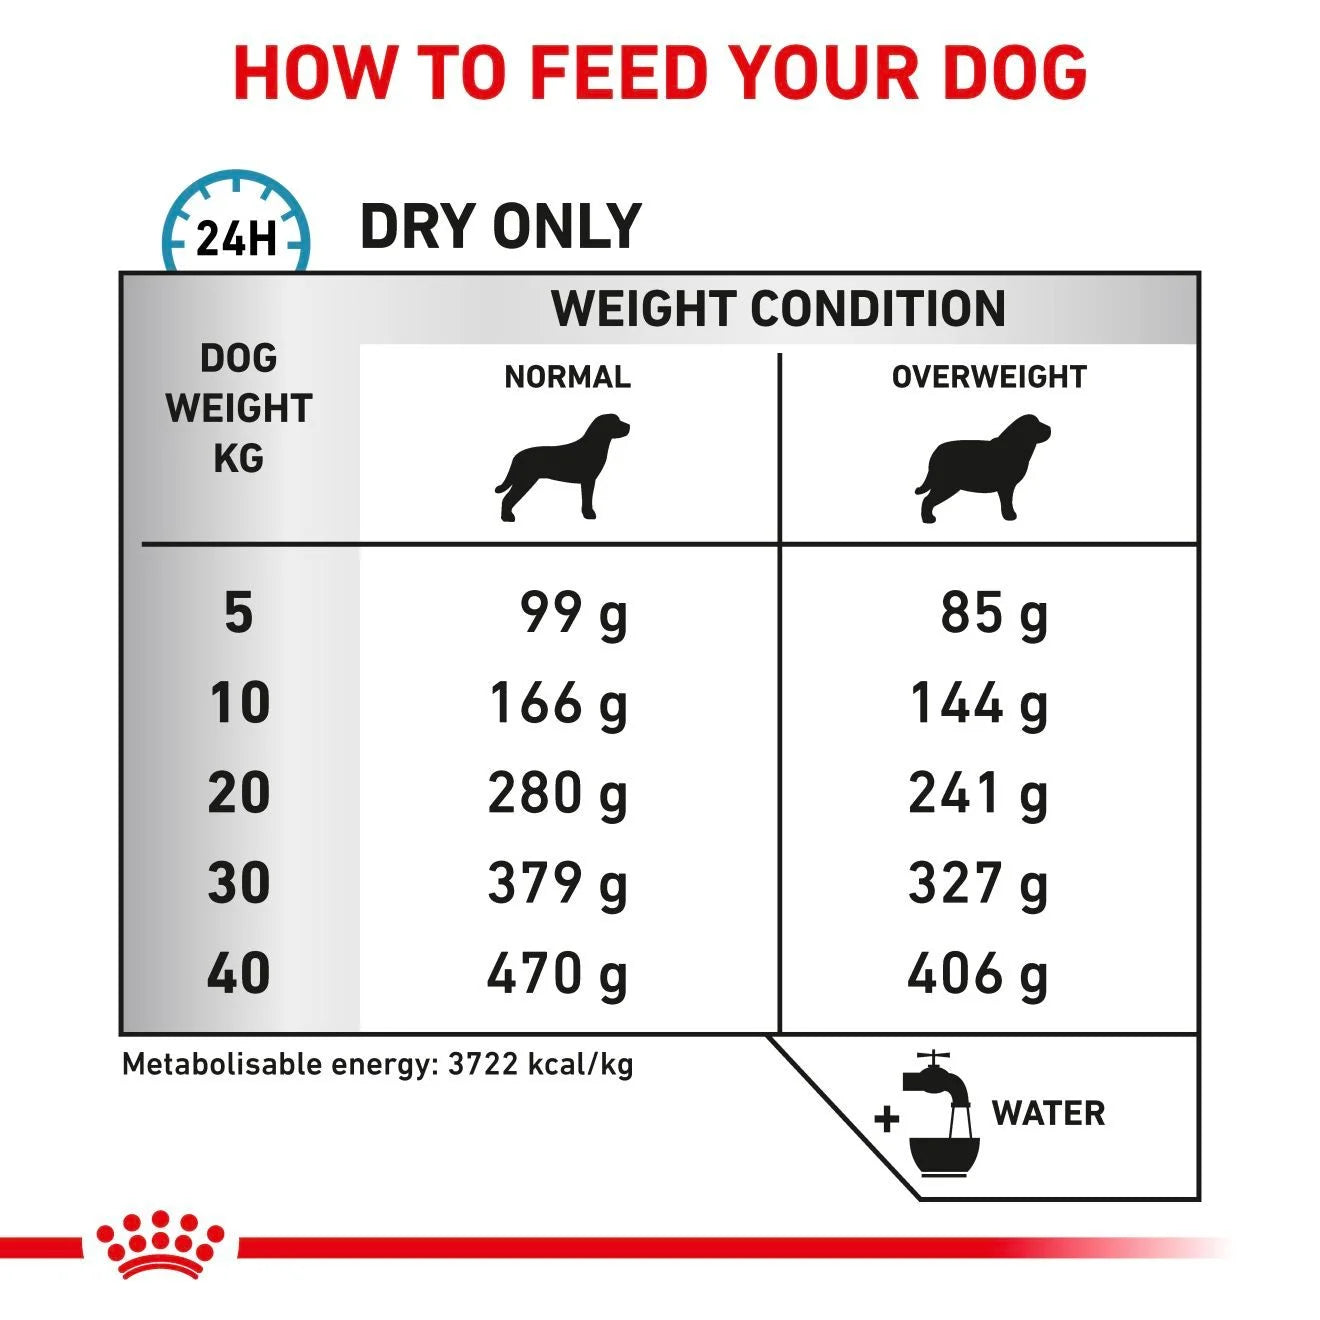 Royal Canin Canine Hypoallergenic Moderate Calorie feeding guide